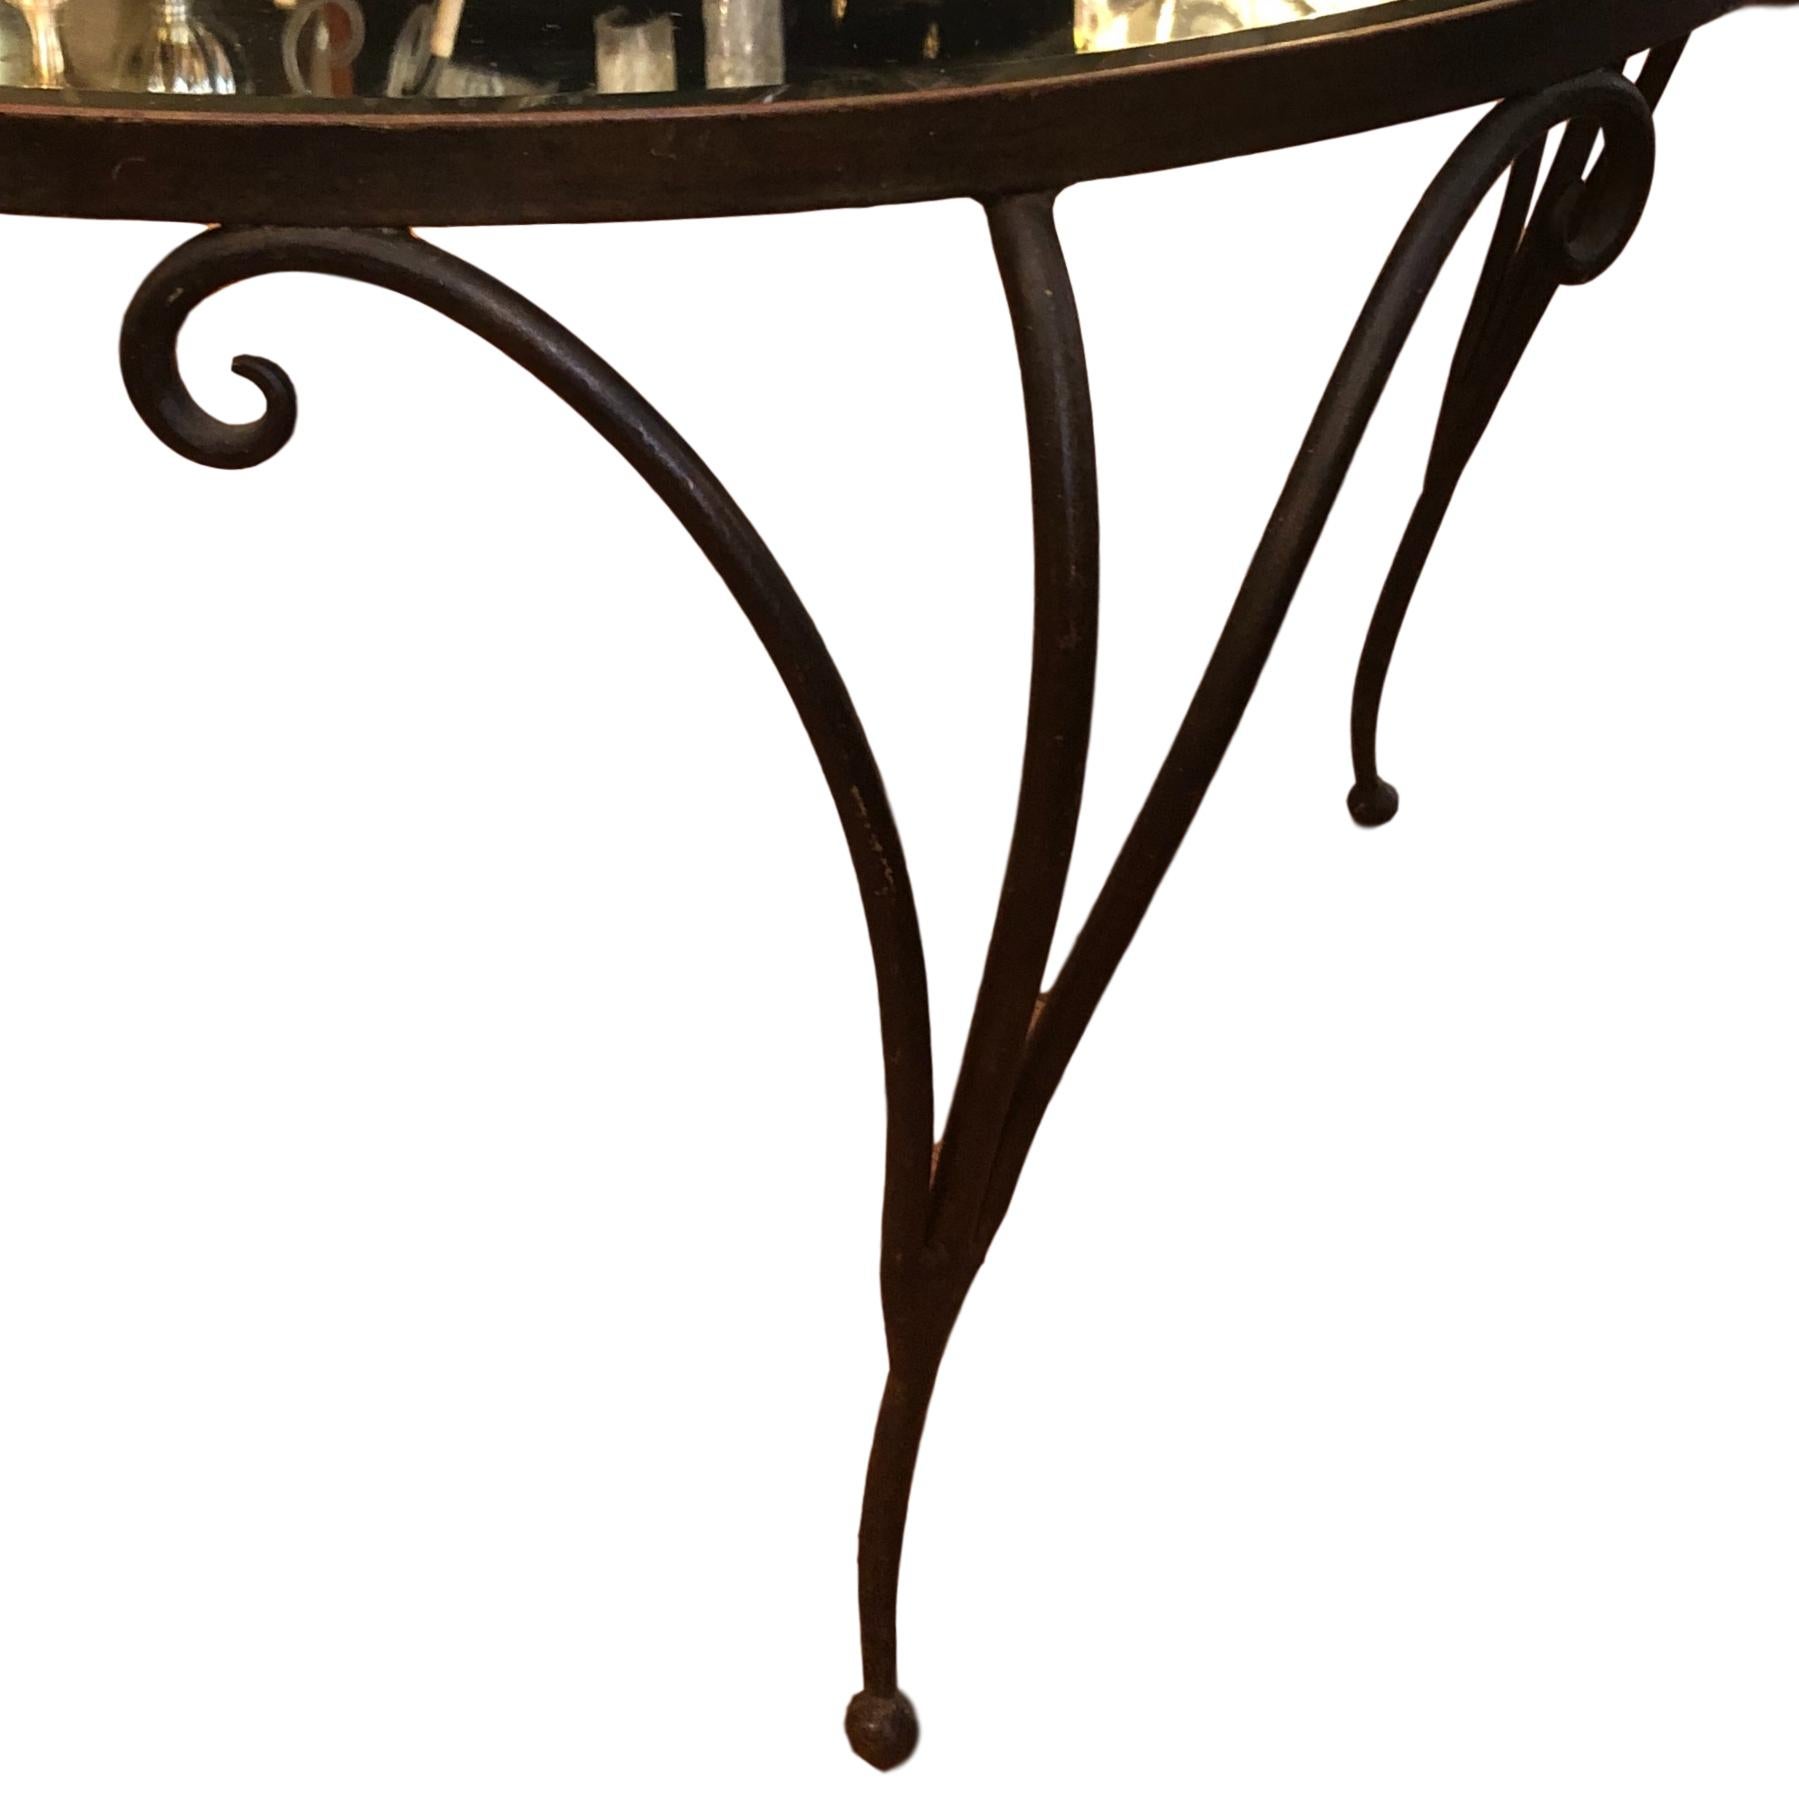 Mid-20th Century French Wrought Iron Table with Mirror Top For Sale